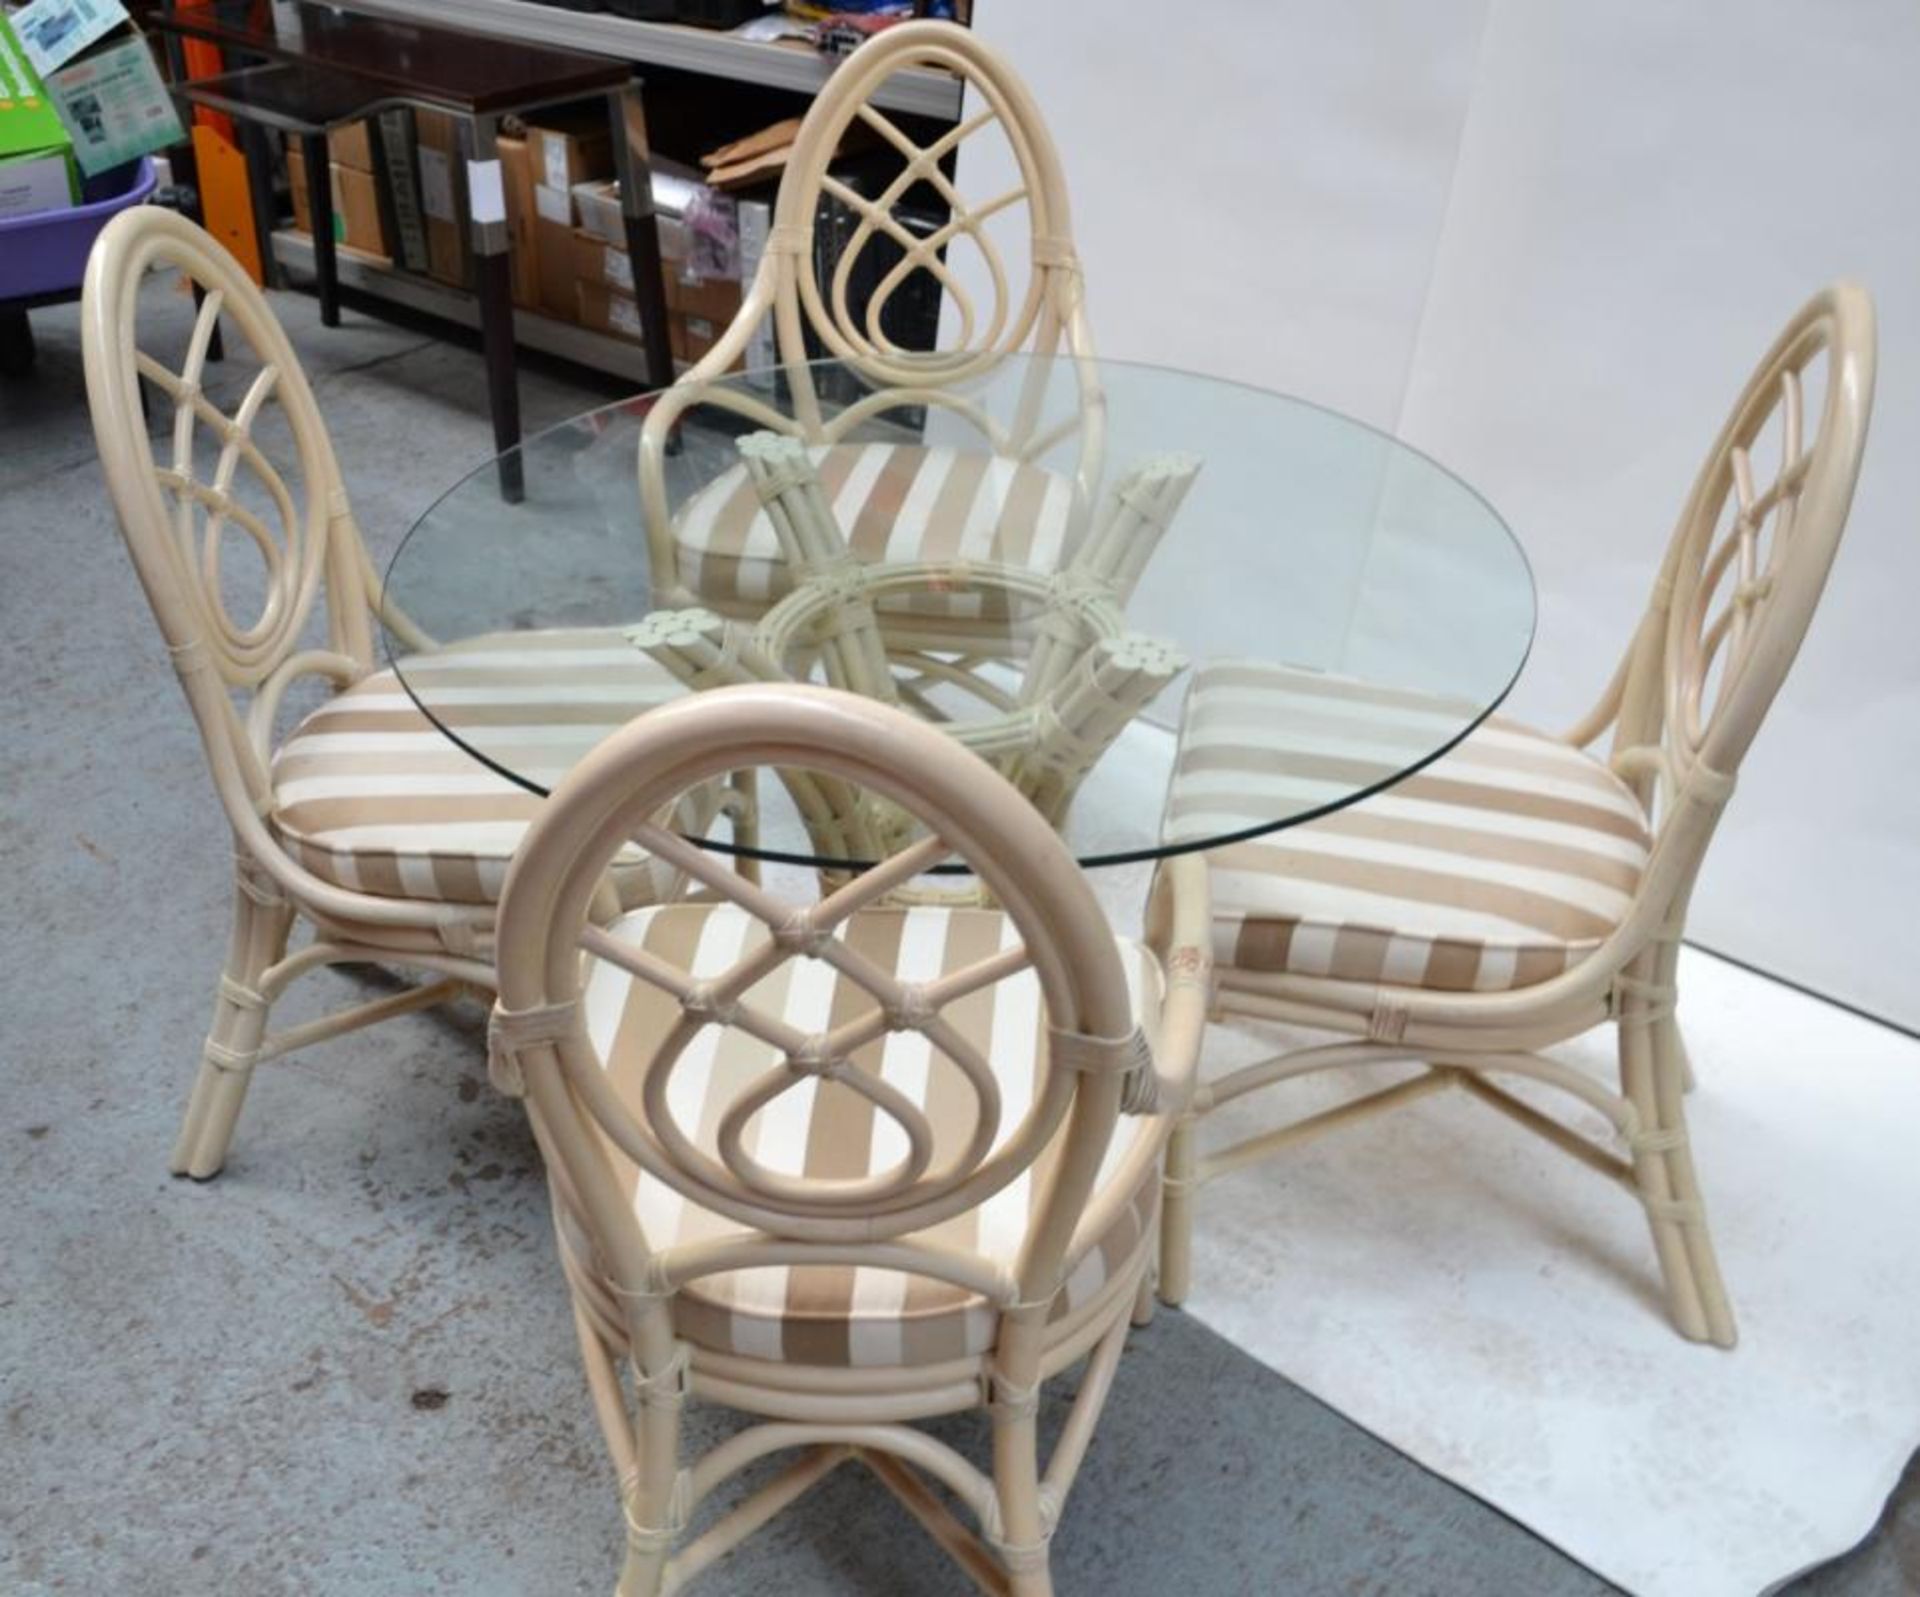 Glass Topped Cane Table with 4 Chairs - Pre-owned In Good Condition - AE010 - CL007 - Location: - Image 5 of 13